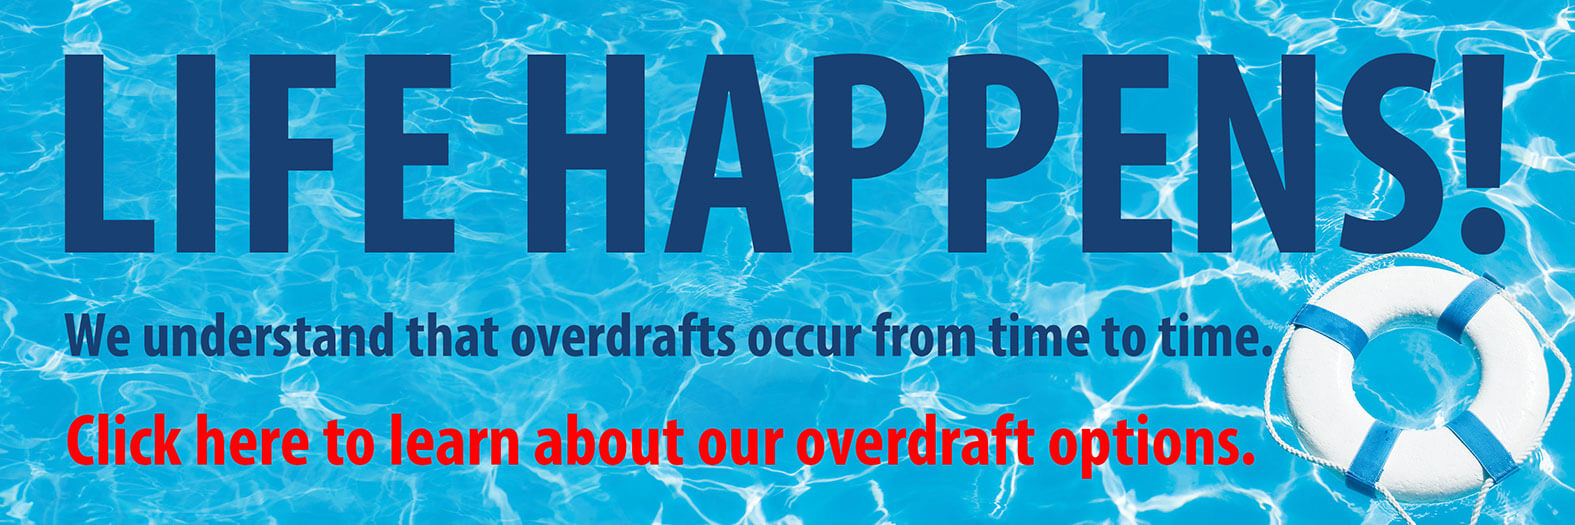 Click to learn about overdraft options!